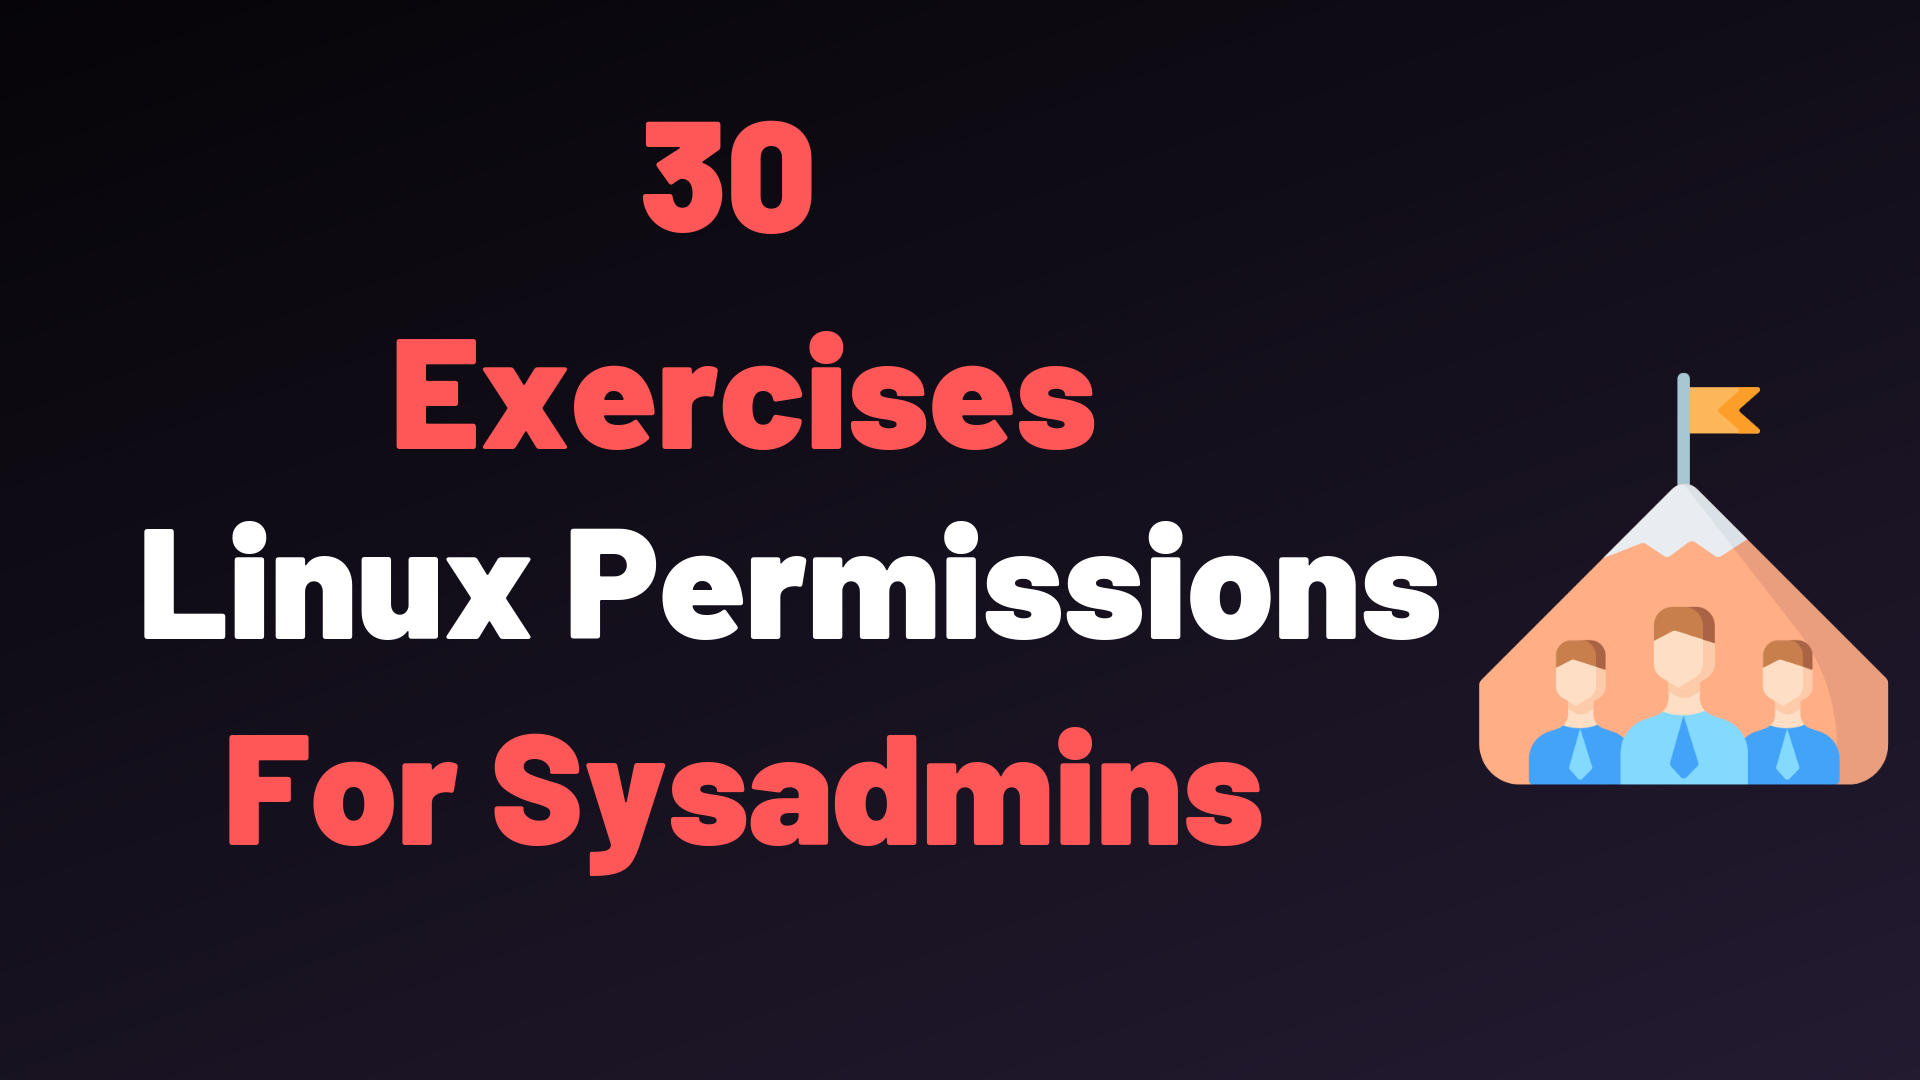 30 Linux Permissions Exercises for Sysadmins